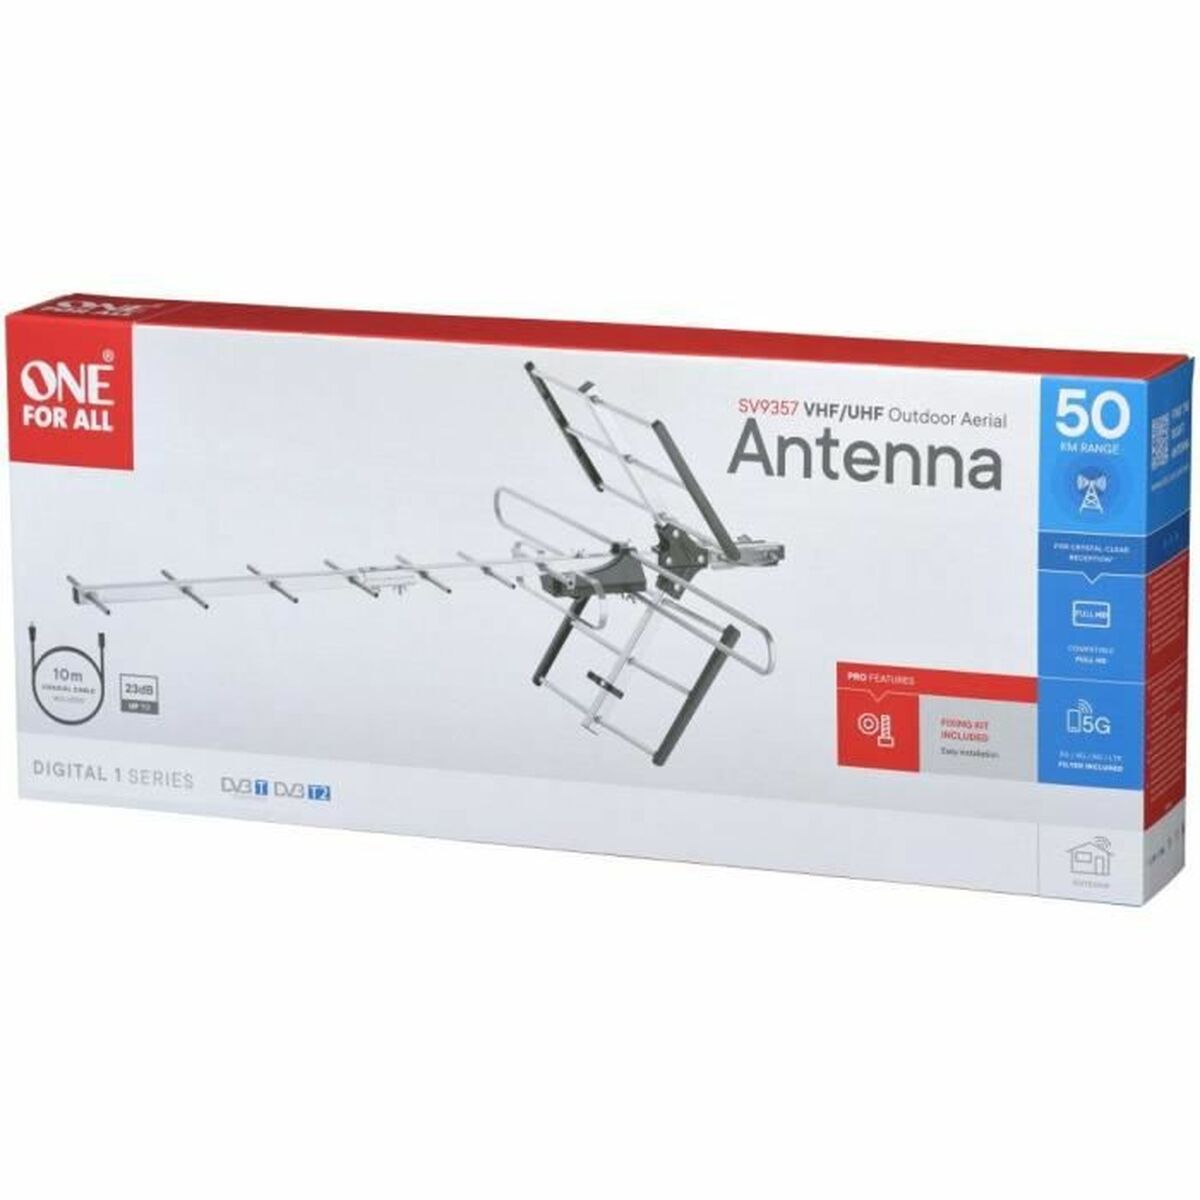 TV antena One For All SV 9357